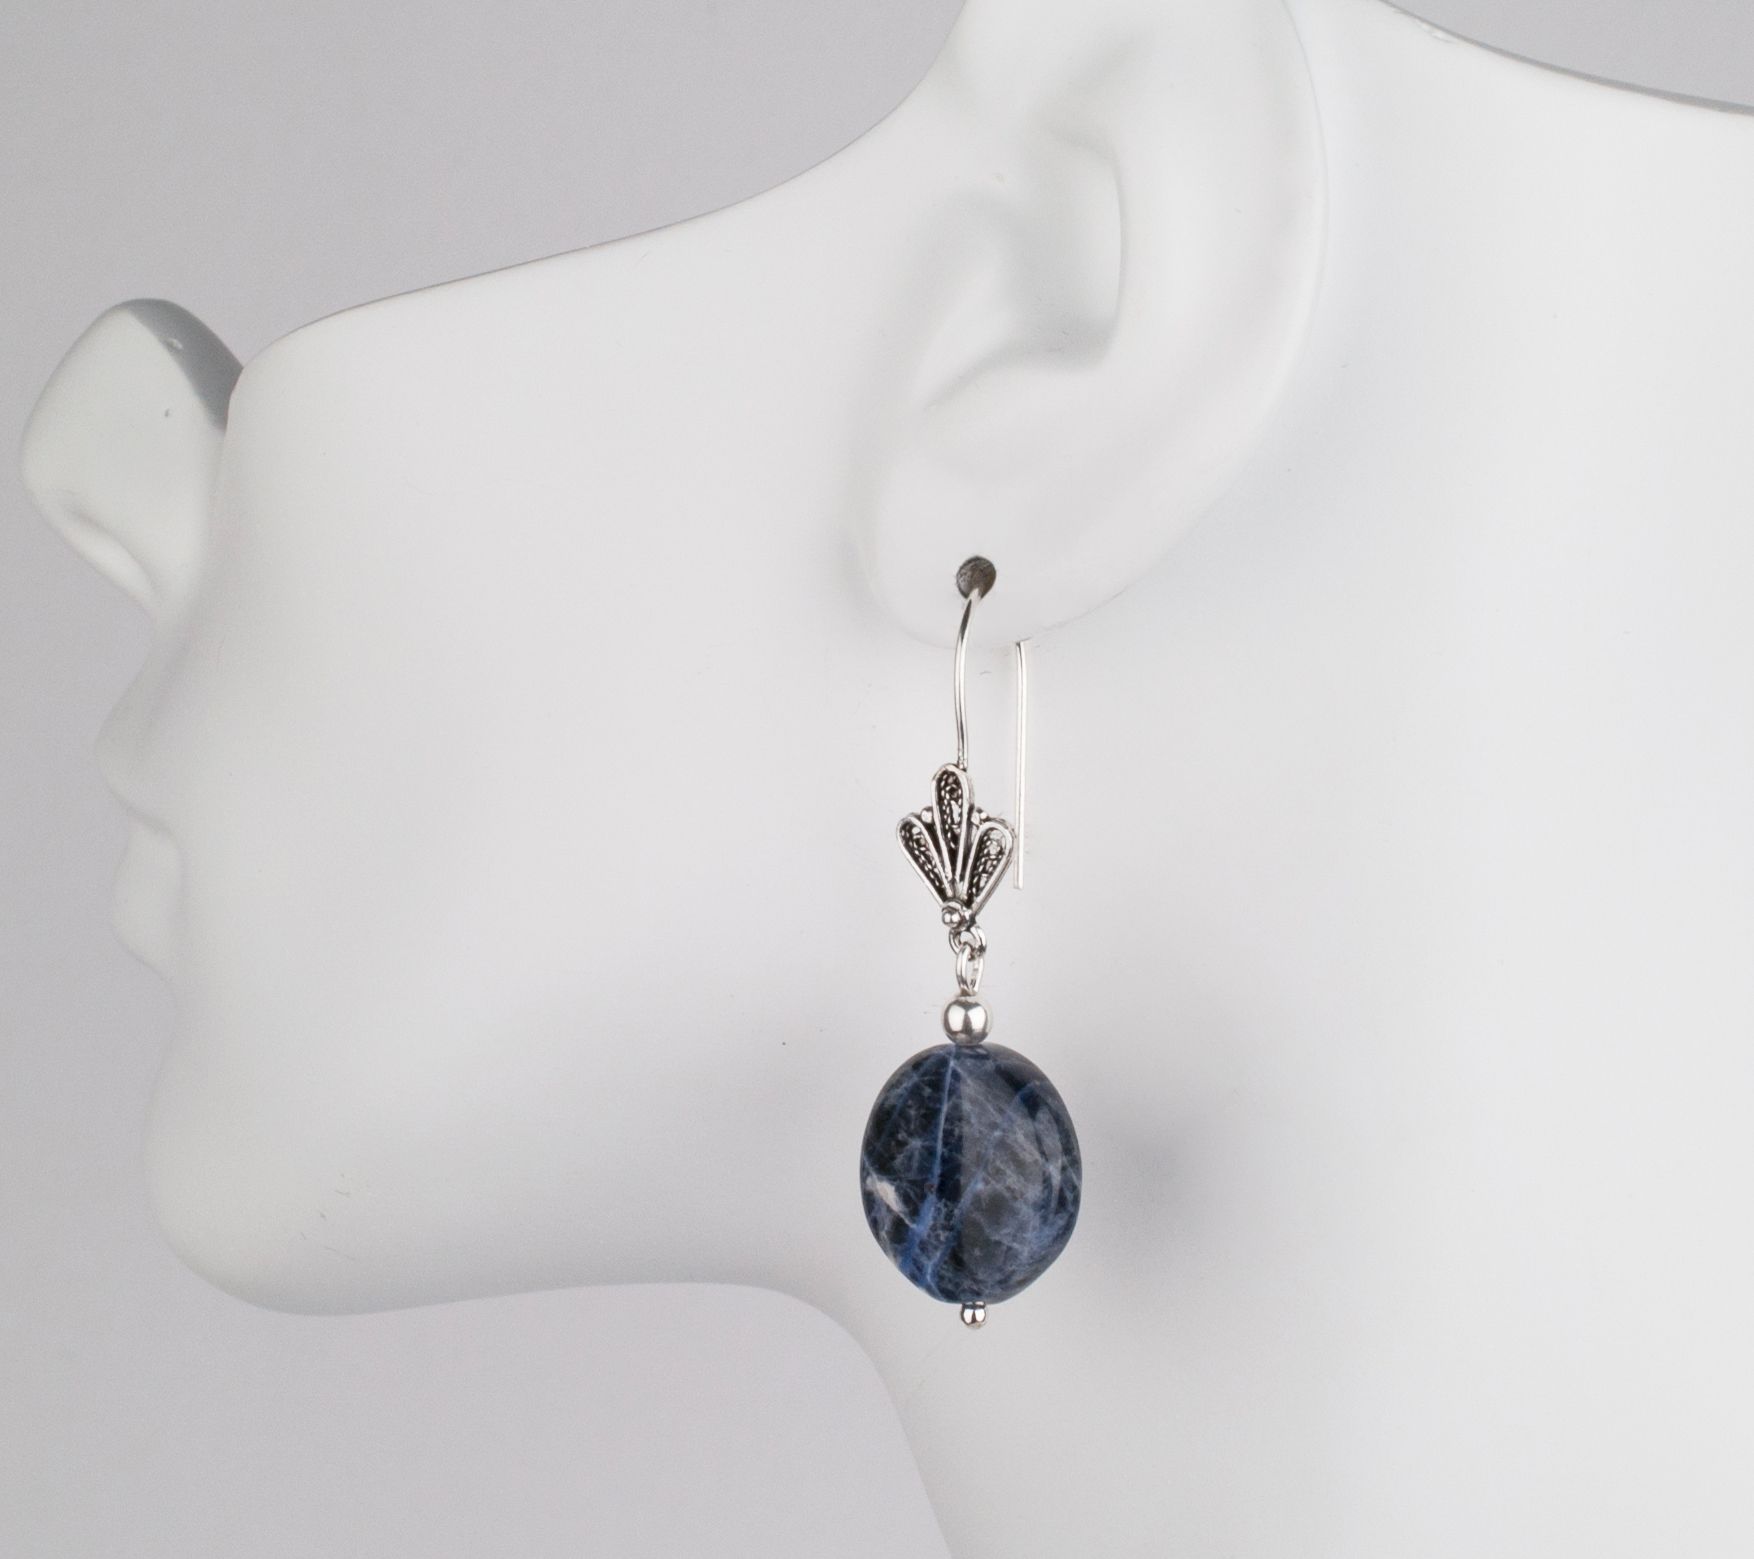 Artisan Crafted Sterling Silver Round Drop Earrings - QVC.com